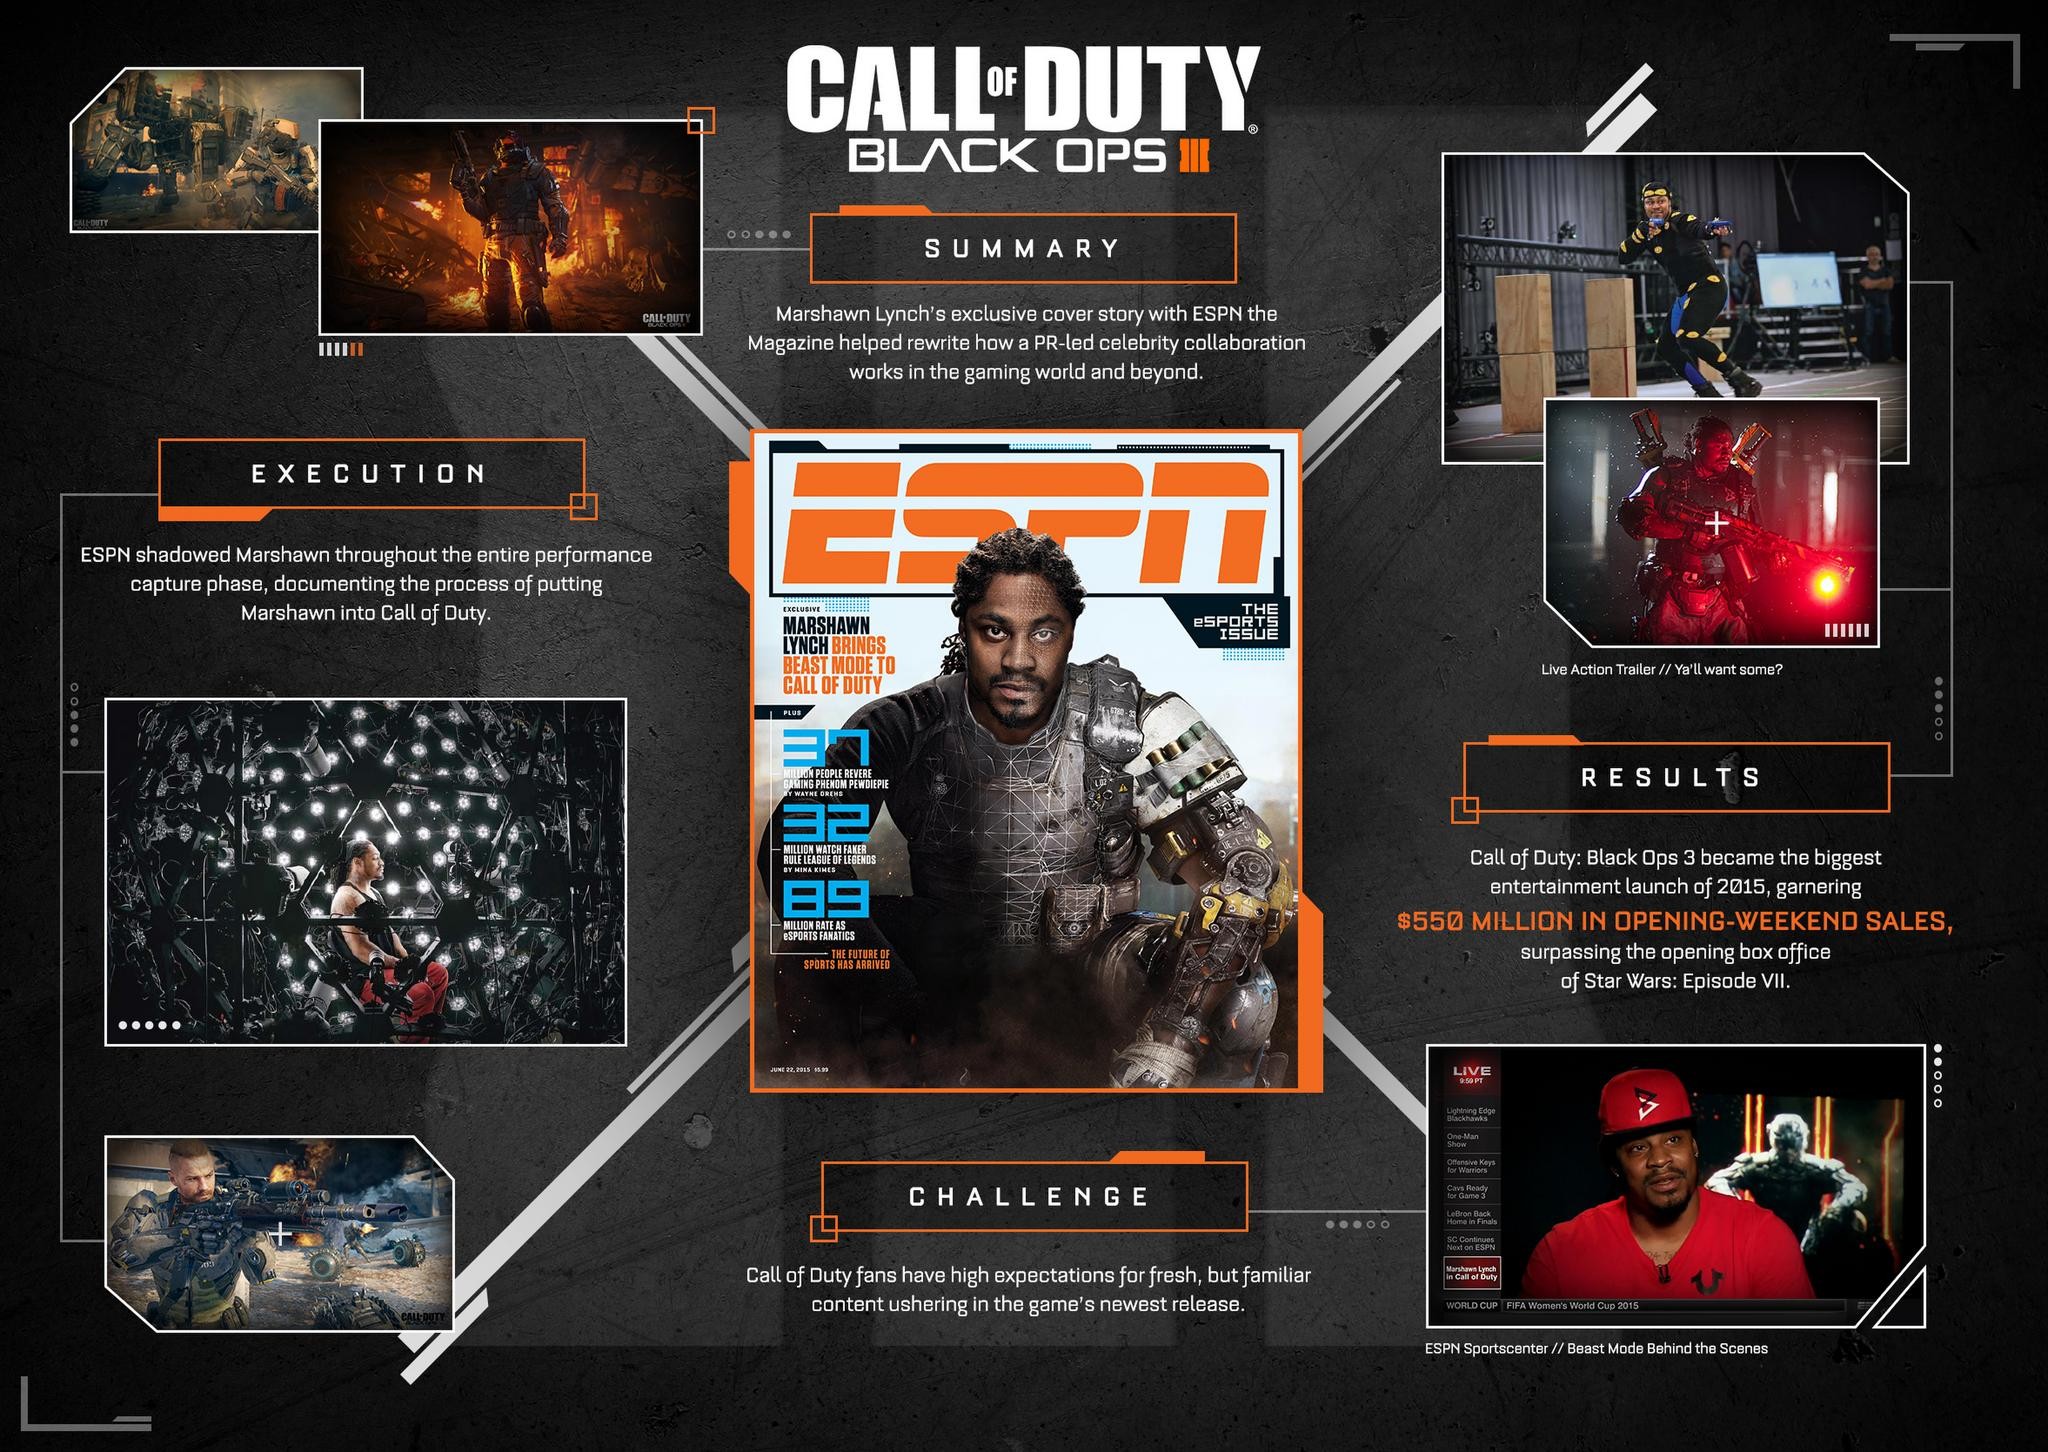 CALL OF DUTY X MARSHAWN LYNCH – ESPN EXCLUSIVE BRINGS FRANCHISE TO NEW AUDIENCES